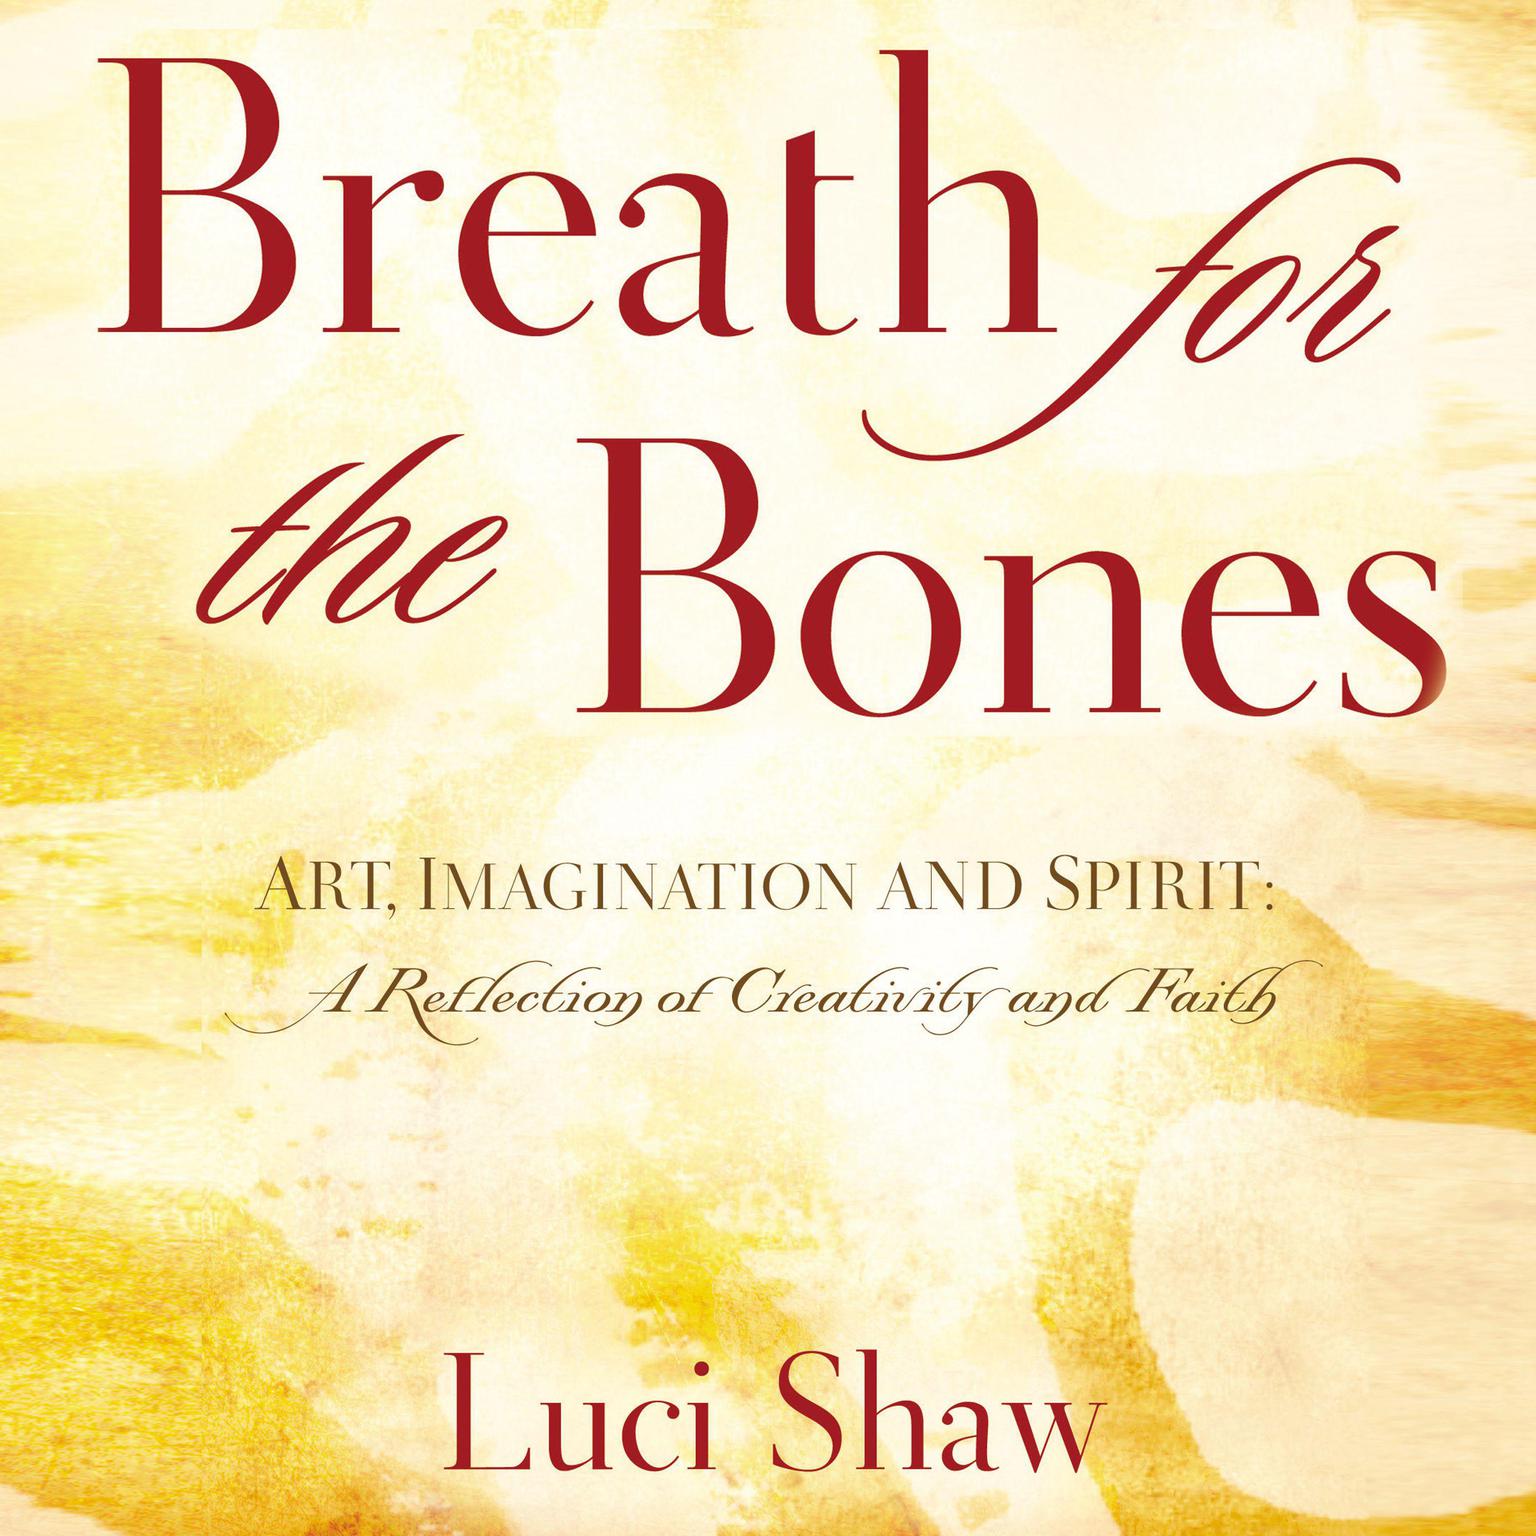 Breath for the Bones: Art, Imagination and Spirit:  A Reflection on Creativity and Faith Audiobook, by Luci Shaw